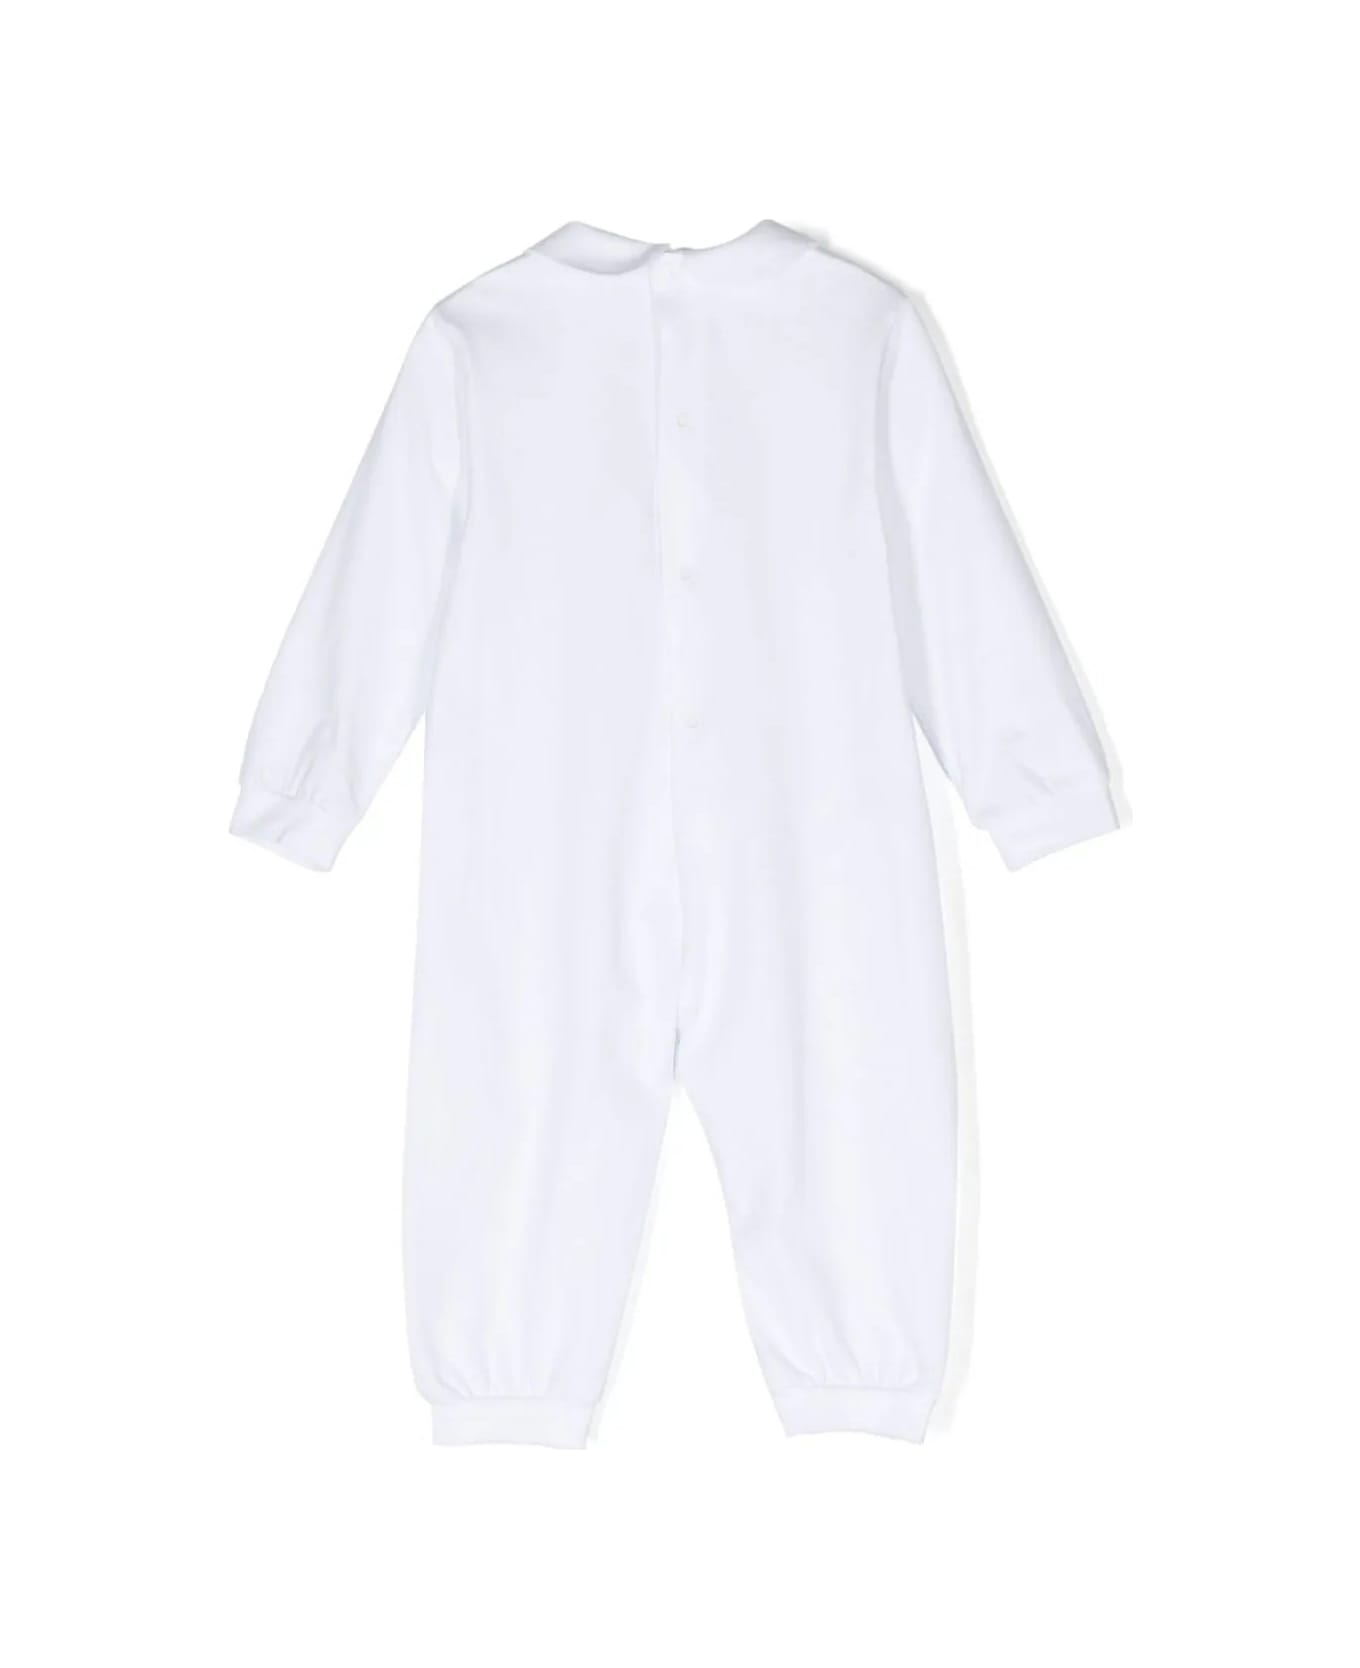 Il Gufo White Stretch Jersey Playsuit With Rabbit Motif - White ボディスーツ＆セットアップ